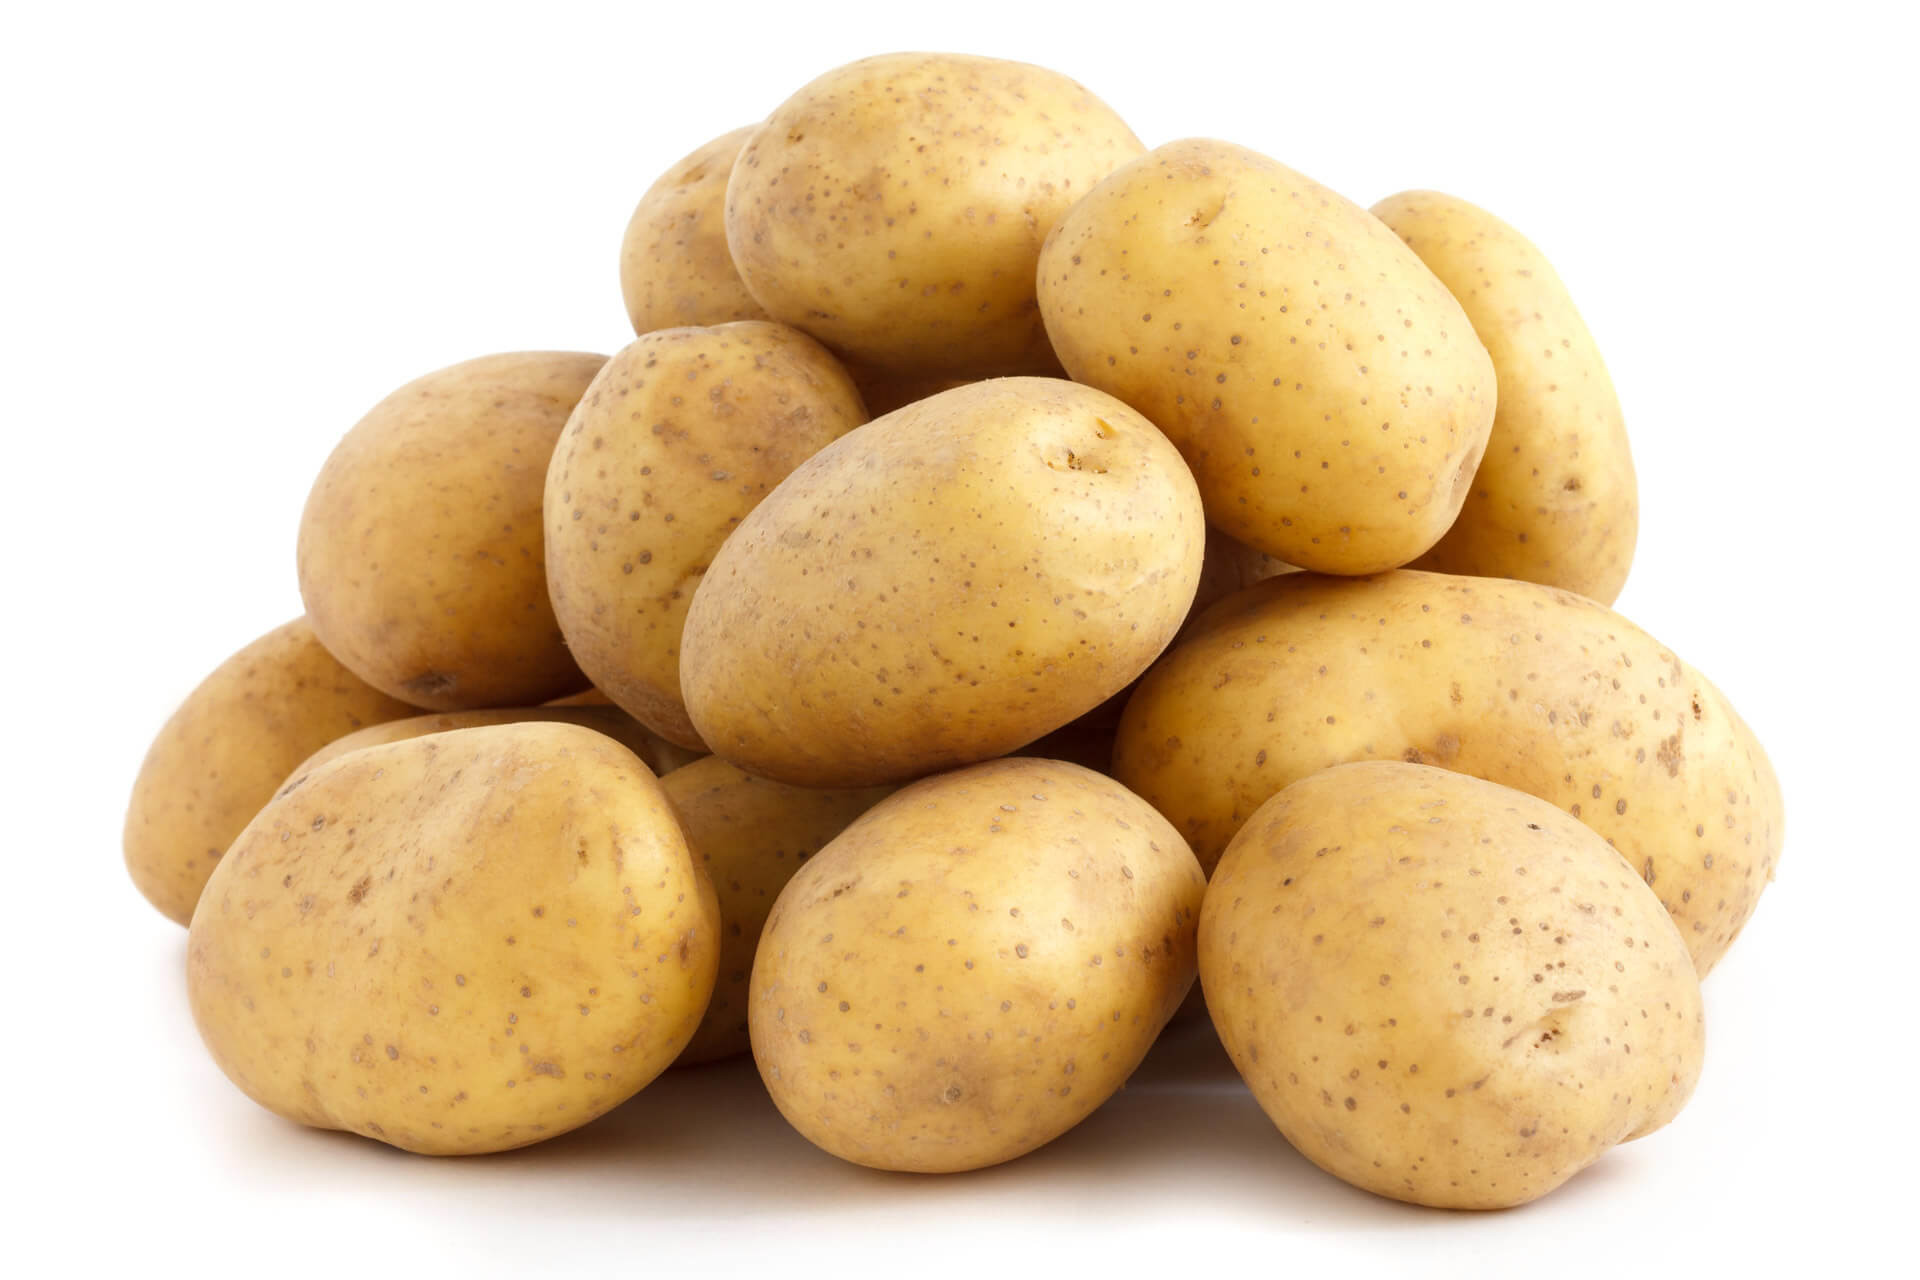 1920x1280 Potato wallpapers, Food, HQ Potato pictures | 4K Wallpapers